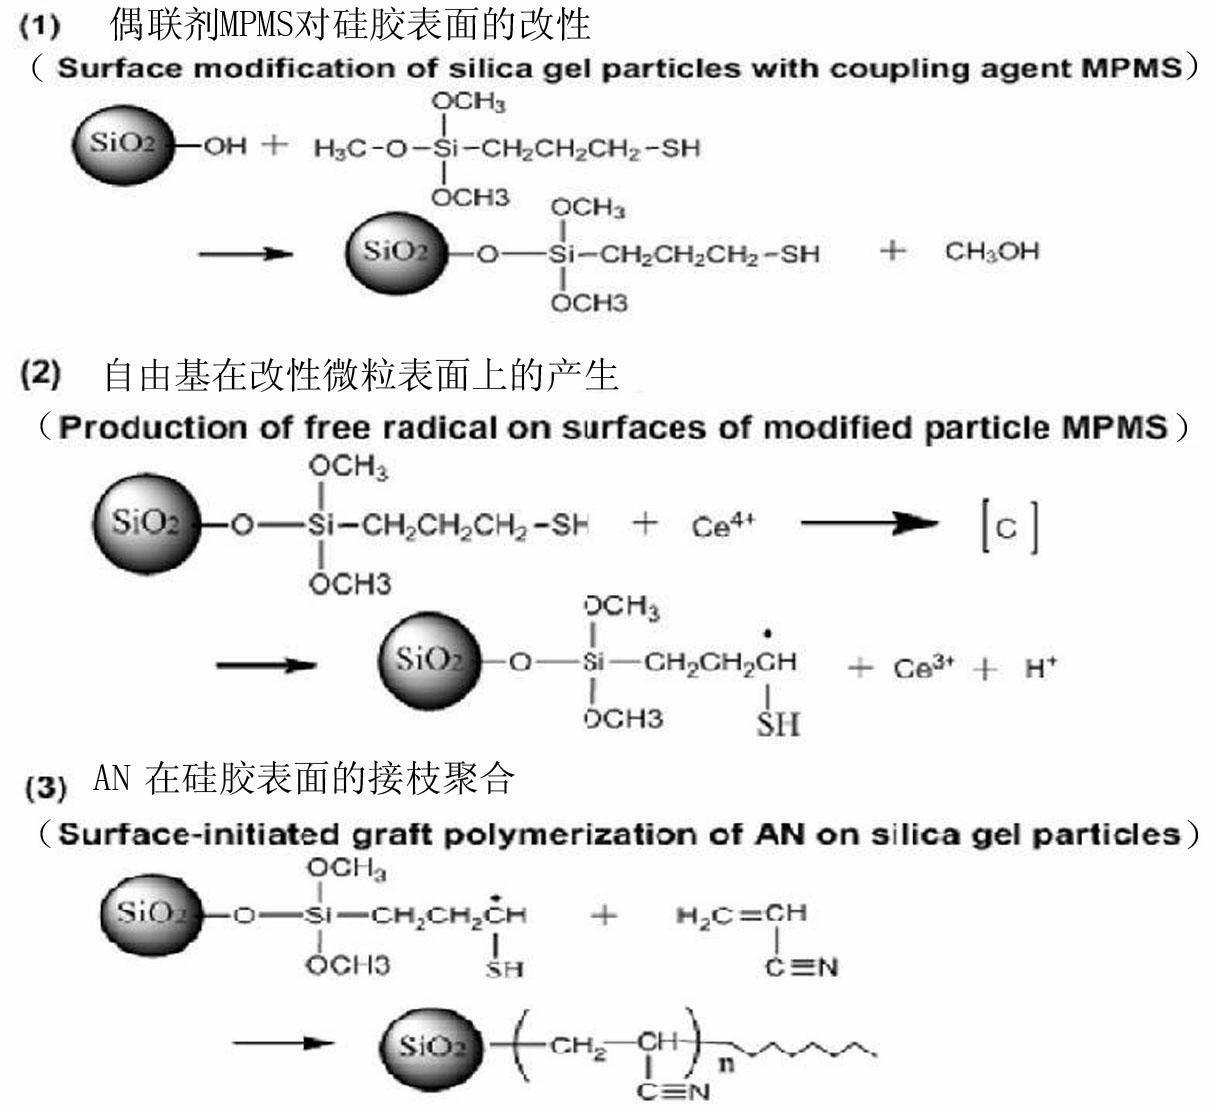 Method for realizing efficient graft polymerization of acrylonitrile on surface of silica gel microparticles by utilizing mercapto-Ce(IV) salt redox initiation system